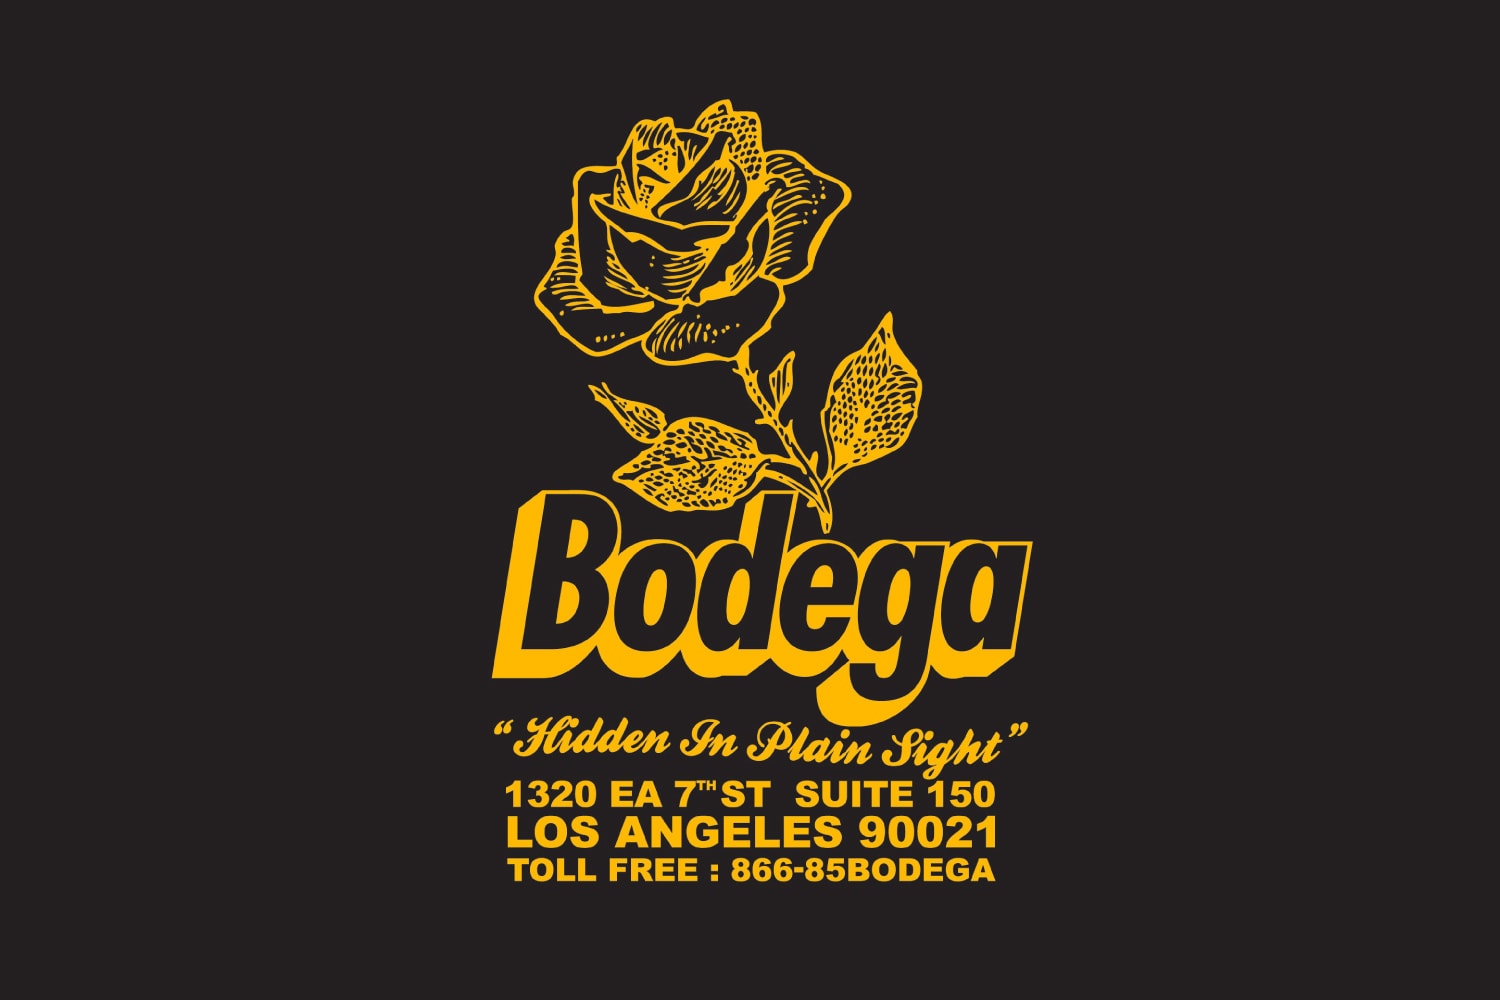 Bodega Los Angeles The ROW new store 2018 release date info drop opening